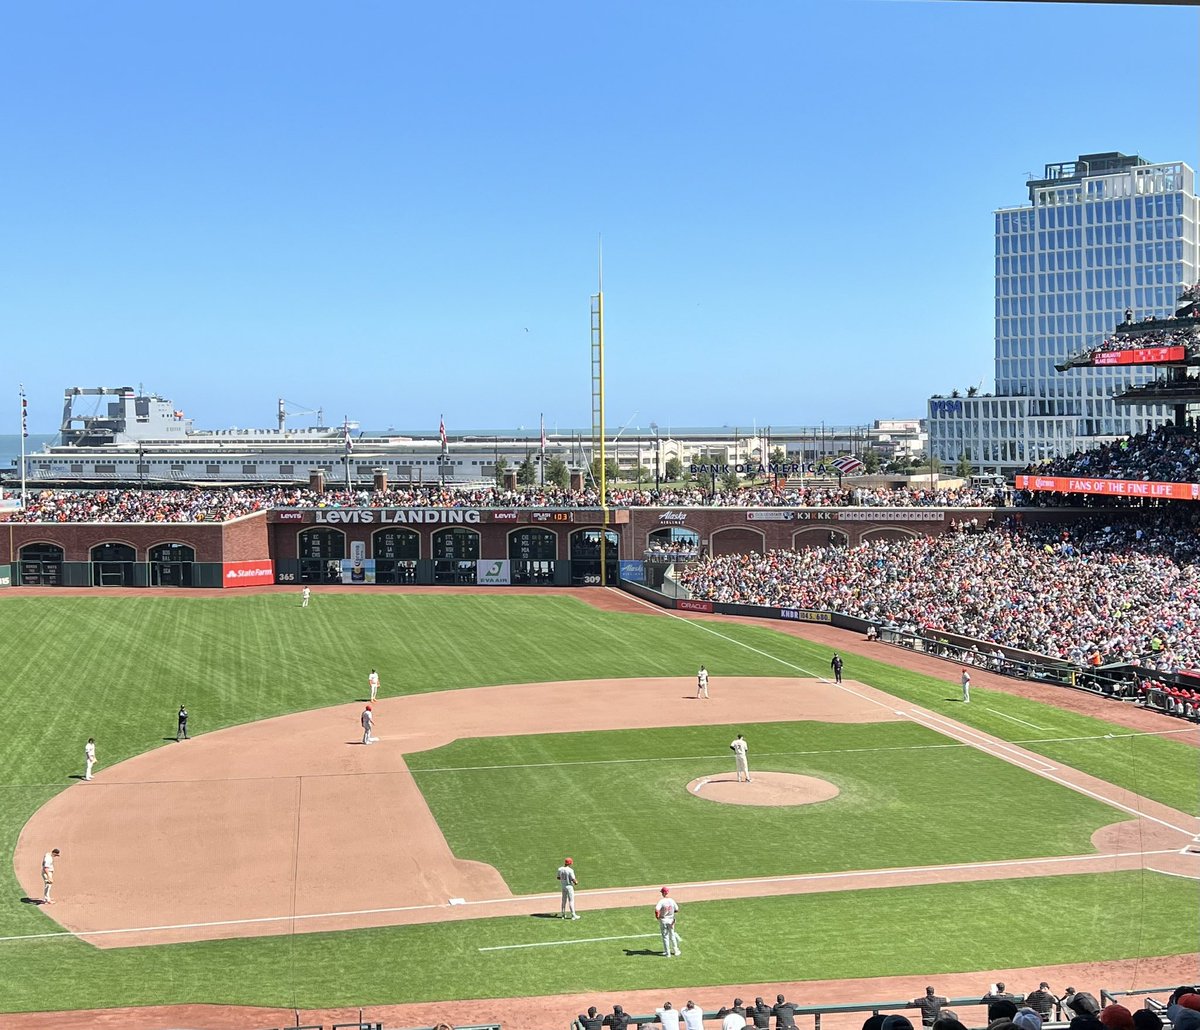 Back at work today, but mentally i’m still at the ballpark. #OraclePark #SanFrancisco #SFGiants